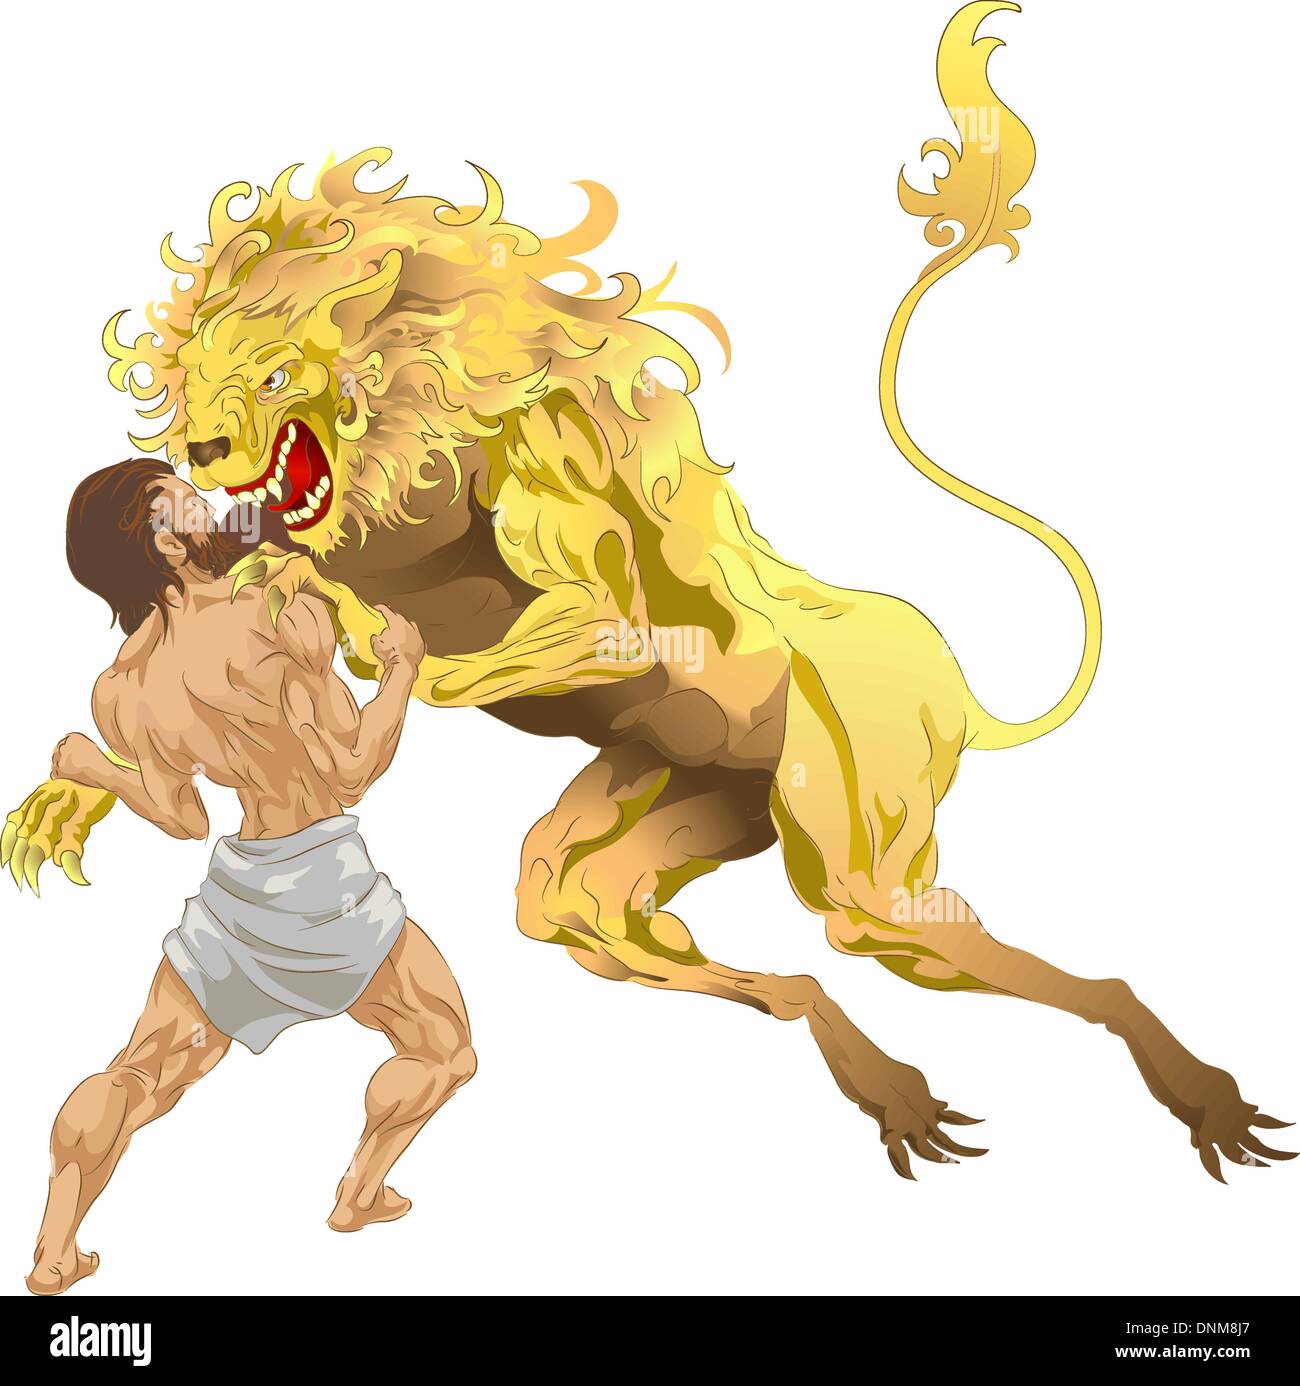 Hercules (Heracles, Herakles) from classical mythology fighting the Nemean lion, the first of his labours. No meshes used. Stock Vector